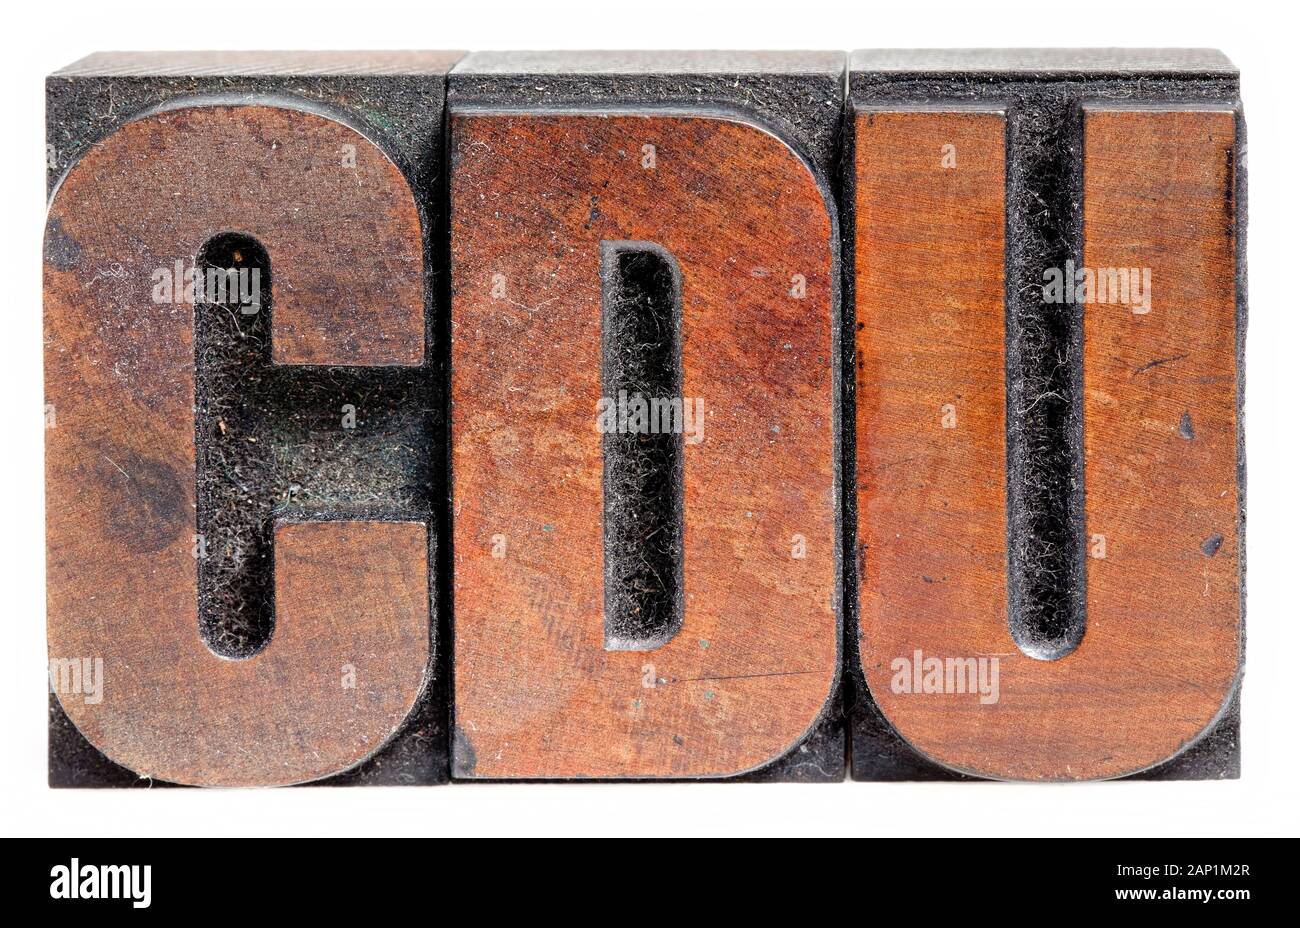 Wooden book printing letters, CDU, Christian-Democratic Union Stock Photo